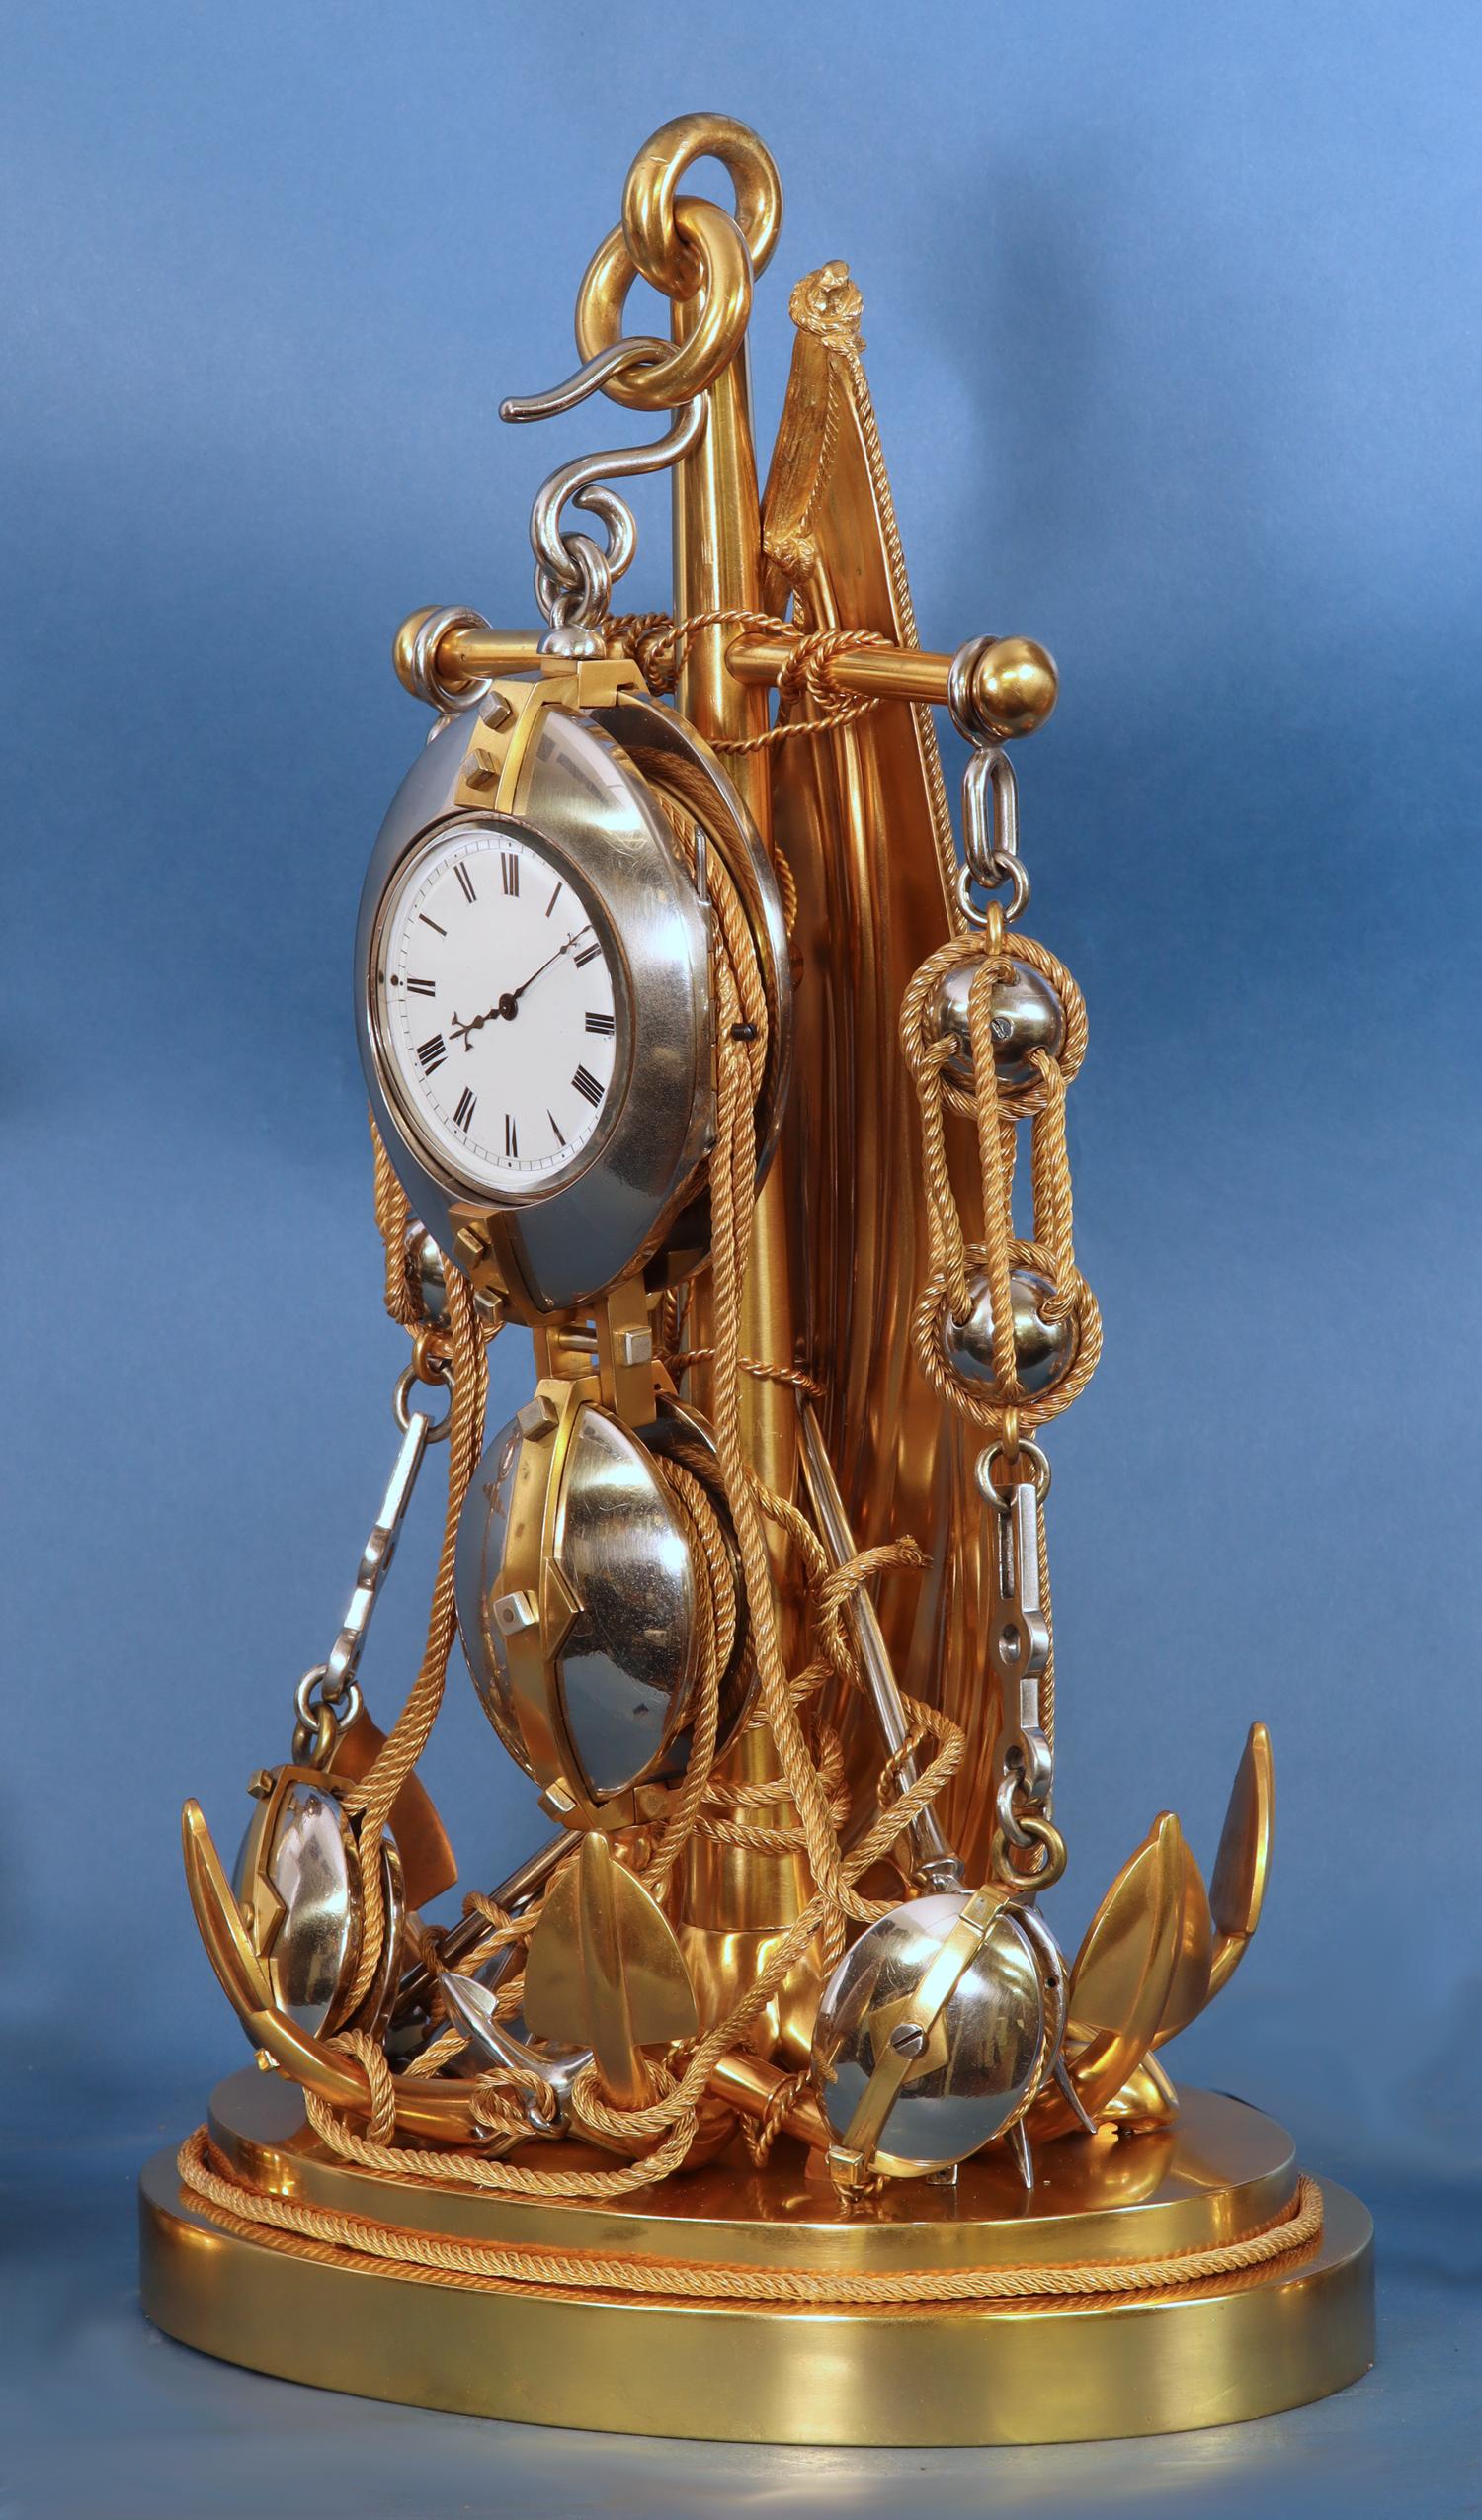 Bronze Rare 19th Century Nautically Themed Mantle Clock with Original Side Pieces.